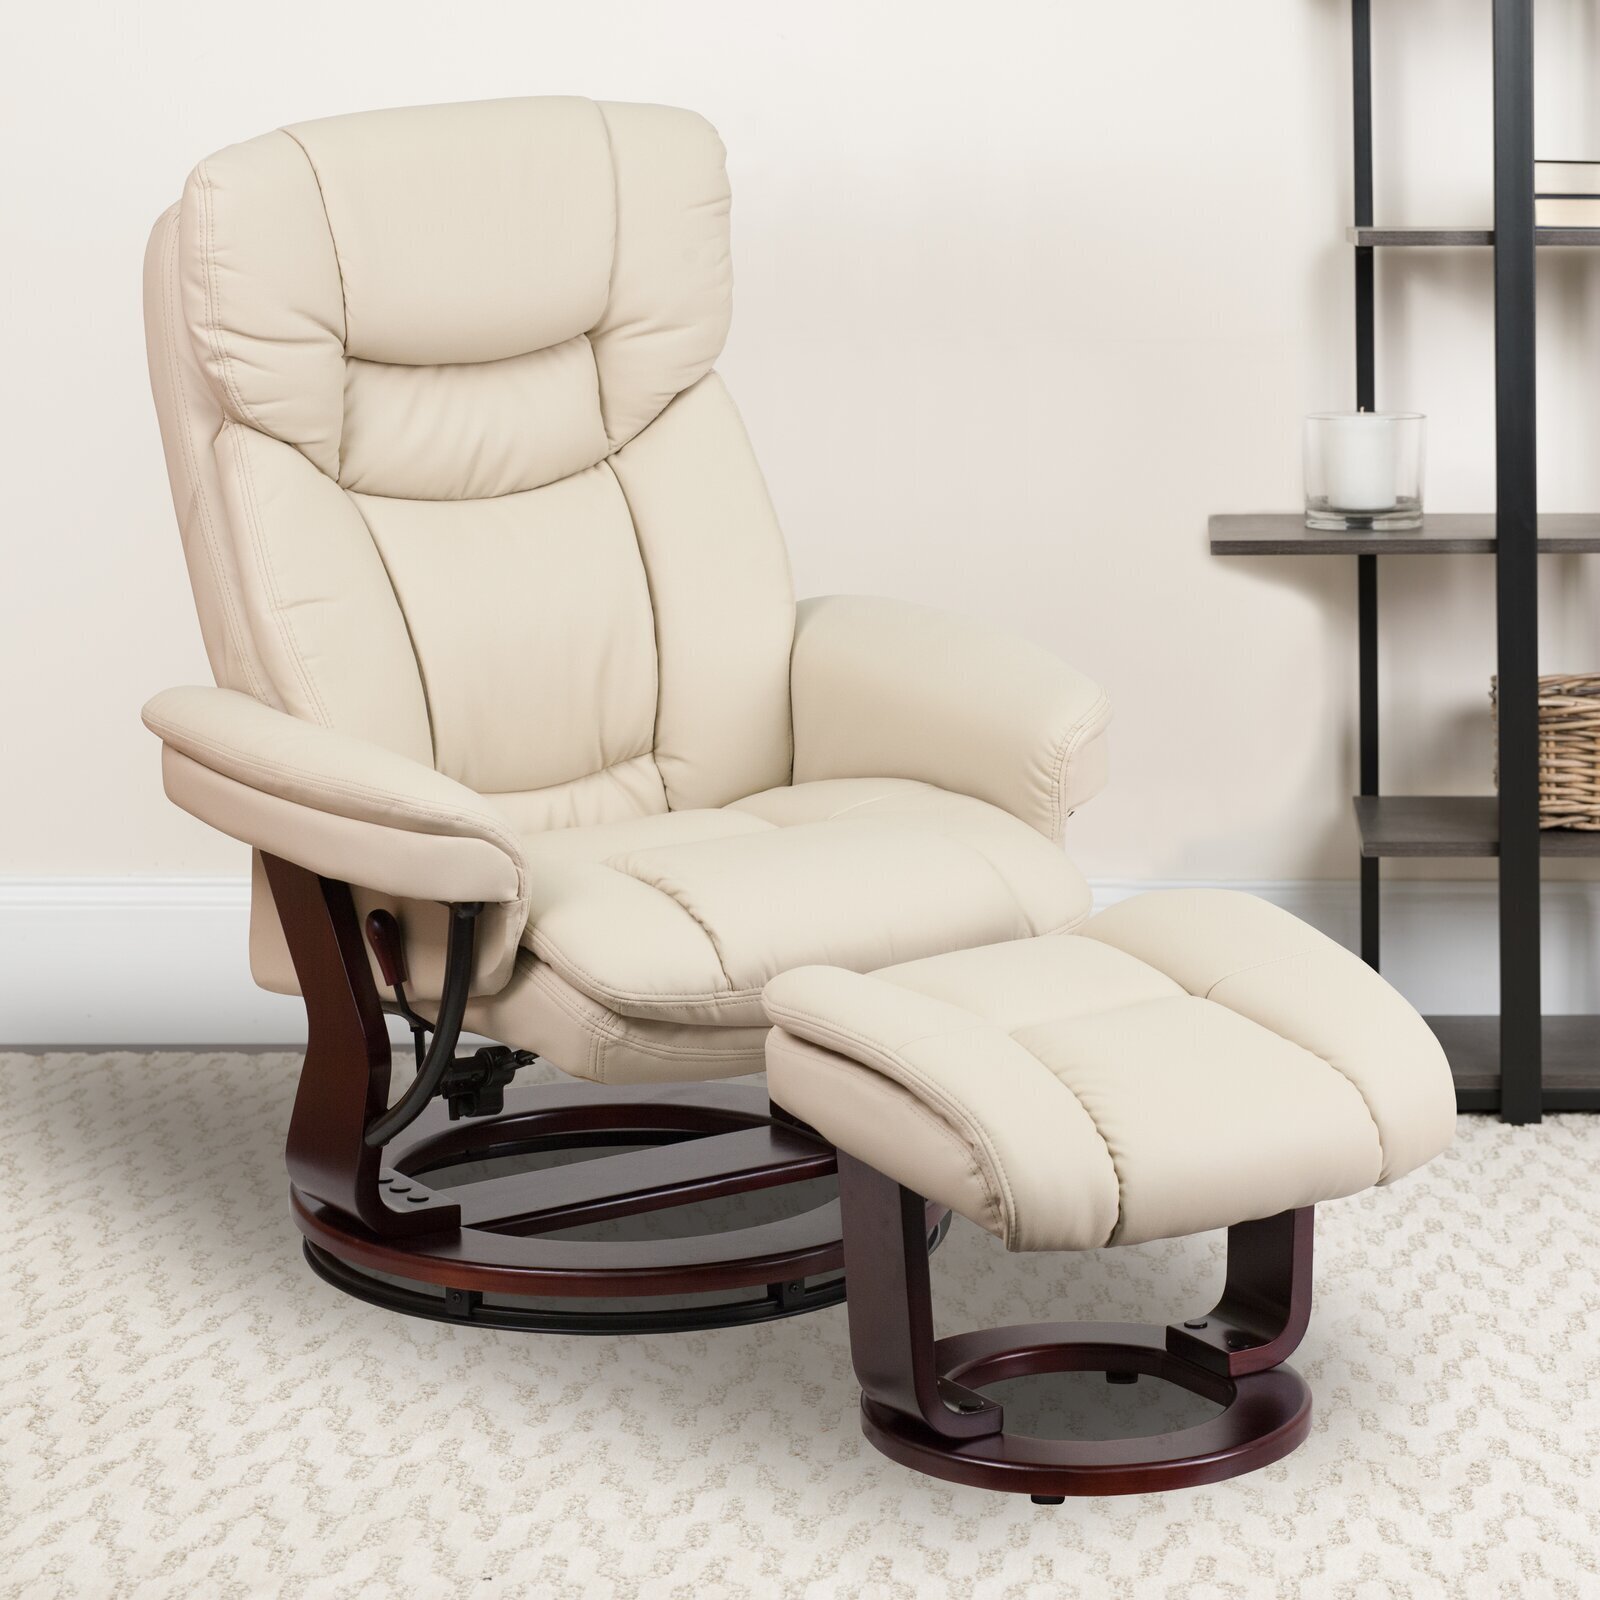 Small Swivel Recliner With Ottoman